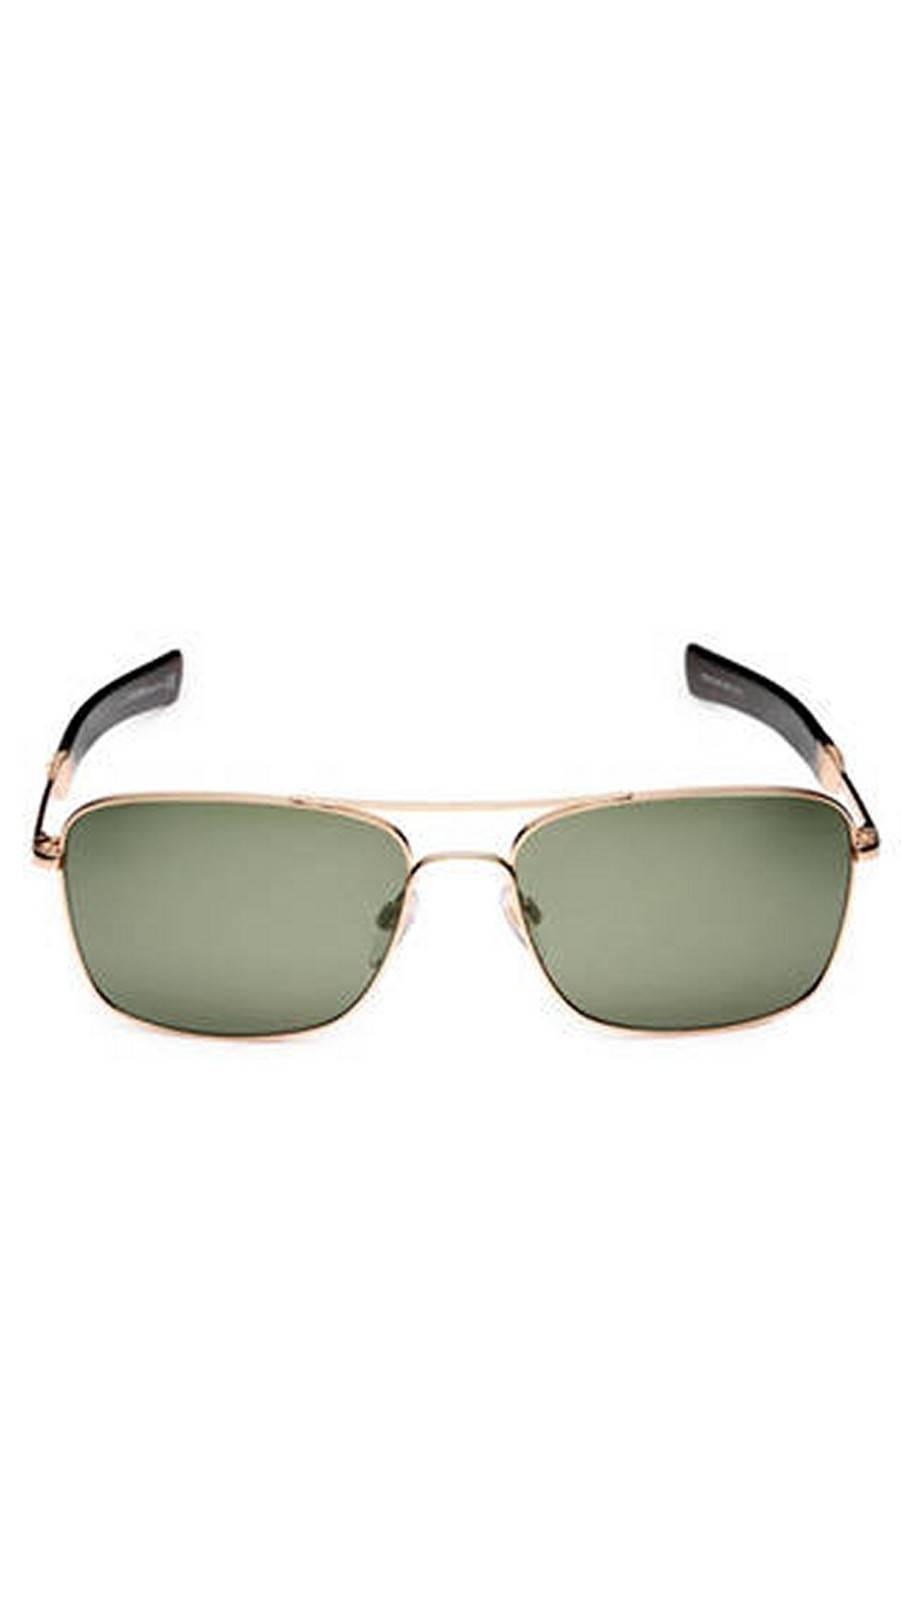 Roberto Cavalli RC1020-28N-59 Metal Gold Rose Havana - Green Sunglasses
Brand: Roberto Cavalli
Style Code: RC1020-28N-59
Frame: Metal
Color: Gold Rose Havana - Green
Brand new condition. 
Original case and cloth included. 
Made in Italy.